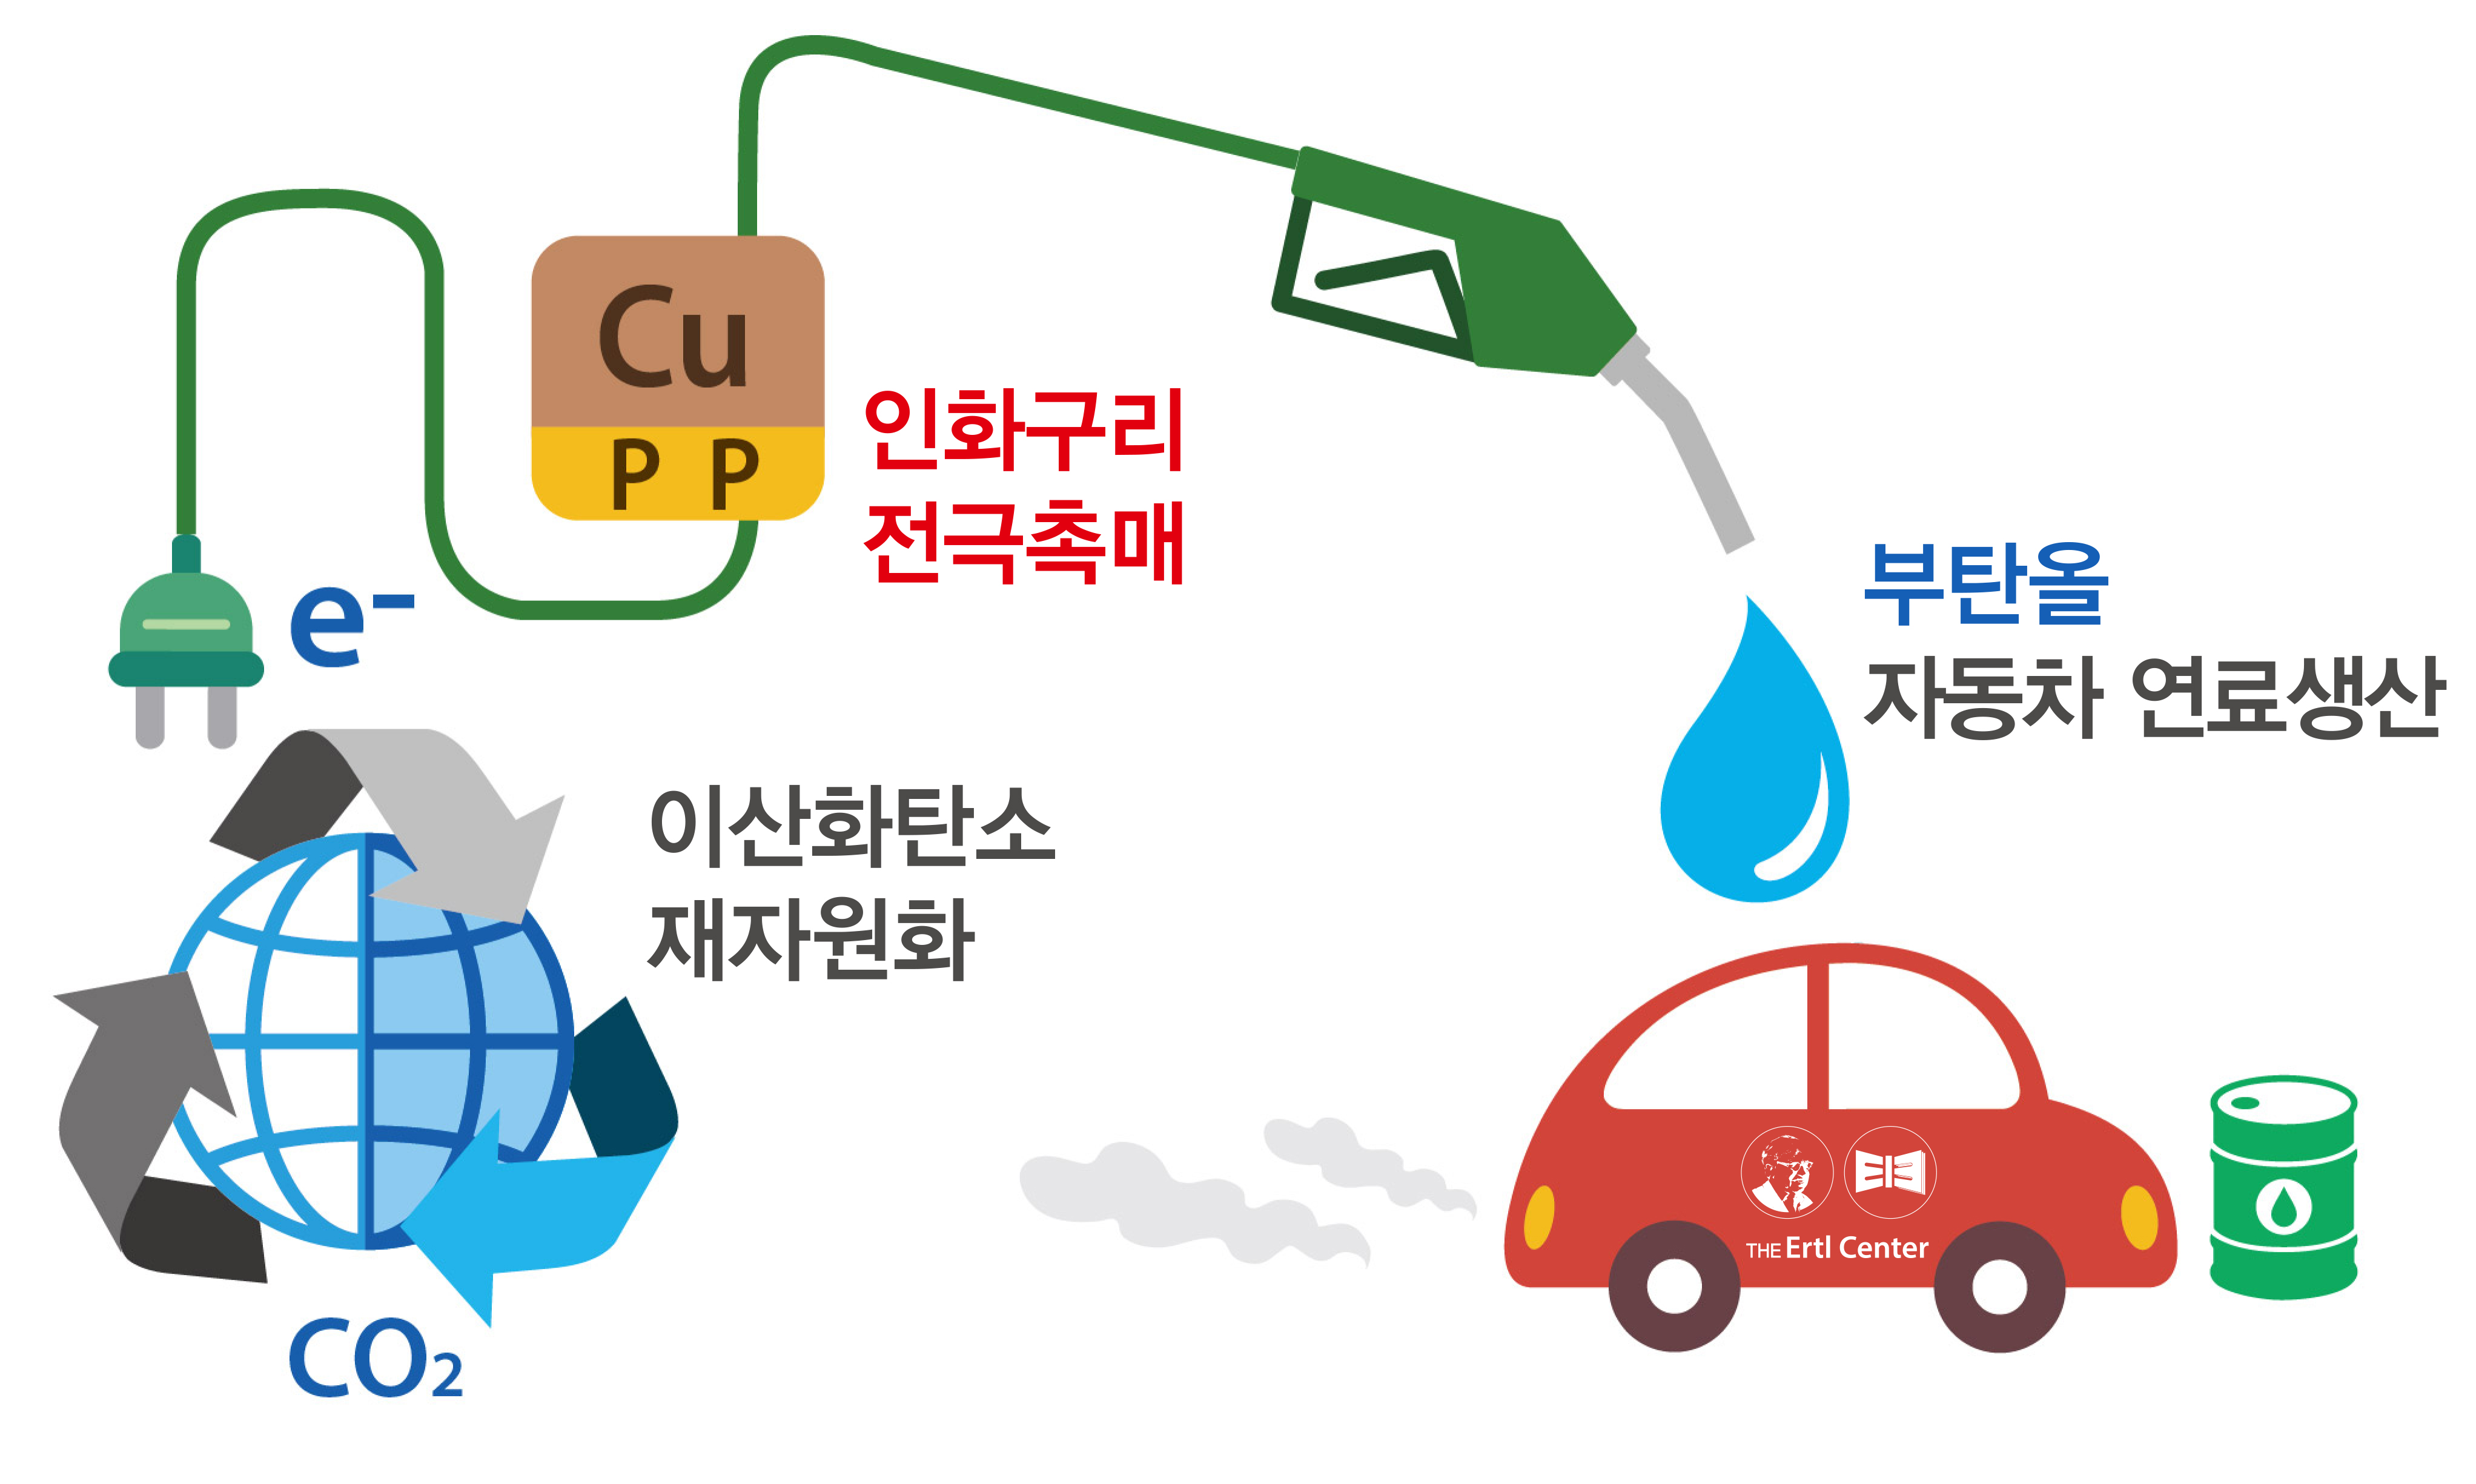 School of Earth Sciences and Environmental Engineering Professor Jaeyoung Lee's research team produces butanol, an eco-friendly automobile fuel from the greenhouse gas carbon dioxide 이미지